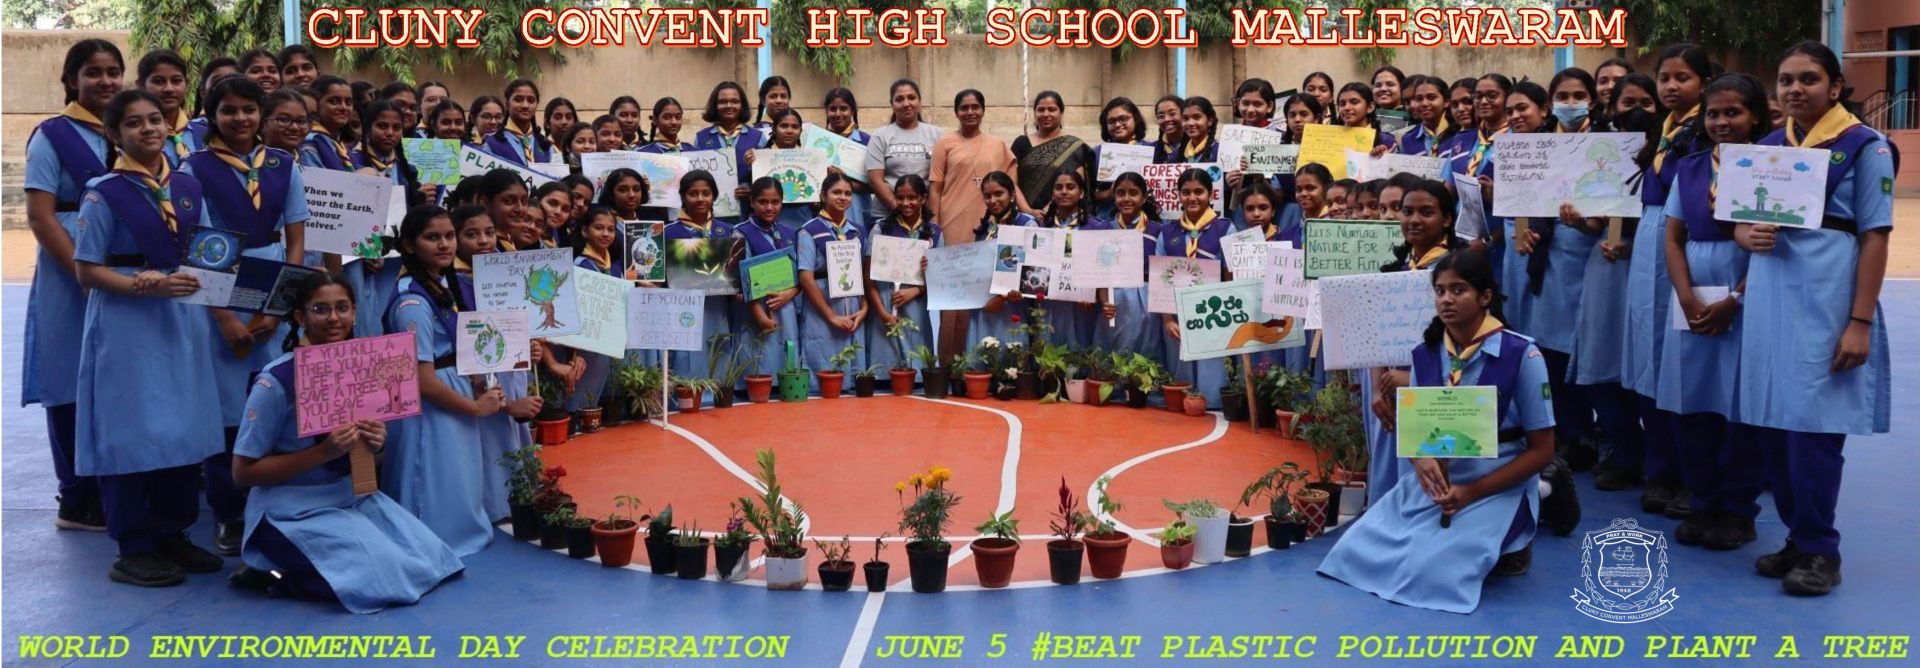 WORLD ENVIRONMENTAL DAY CELEBRATION #BEAT PLASTIC POLLUTION AND PLANT A TREE